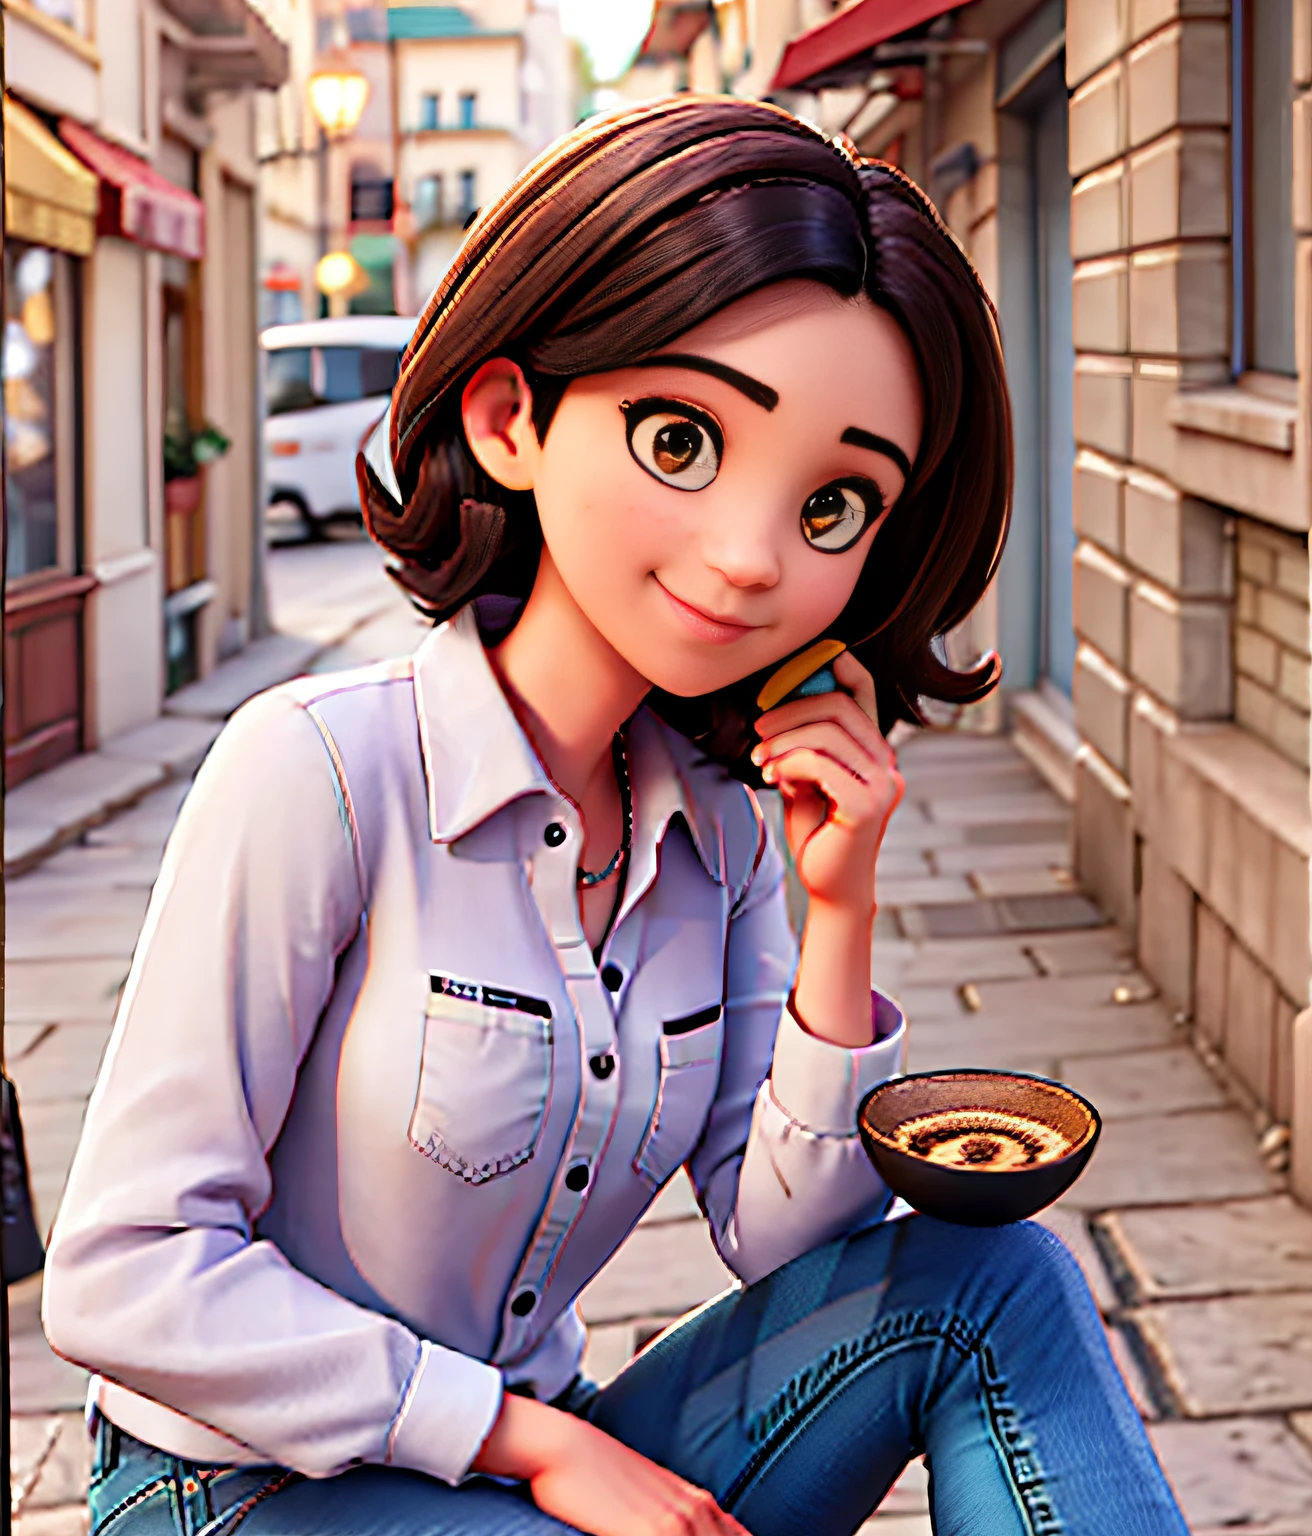 Beautiful Brazilian woman sitting and drinking coffee outside on the side of the street in a small café, beautiful face, Short black hair down to the nape of her neck with brown eyes and heavy eyeshadow, Wearing jeans and a black polo shirt, grande estilo de moda, looking at you with loving eyes and a soft smile, Background is a European city of the city center, fundo desfocado, profundidade de campo rasa, Cinematic light, luz suave, retroiluminado, micro-detalhes, renderizado, fotorrealista, cinemactic, 85mm 1.4